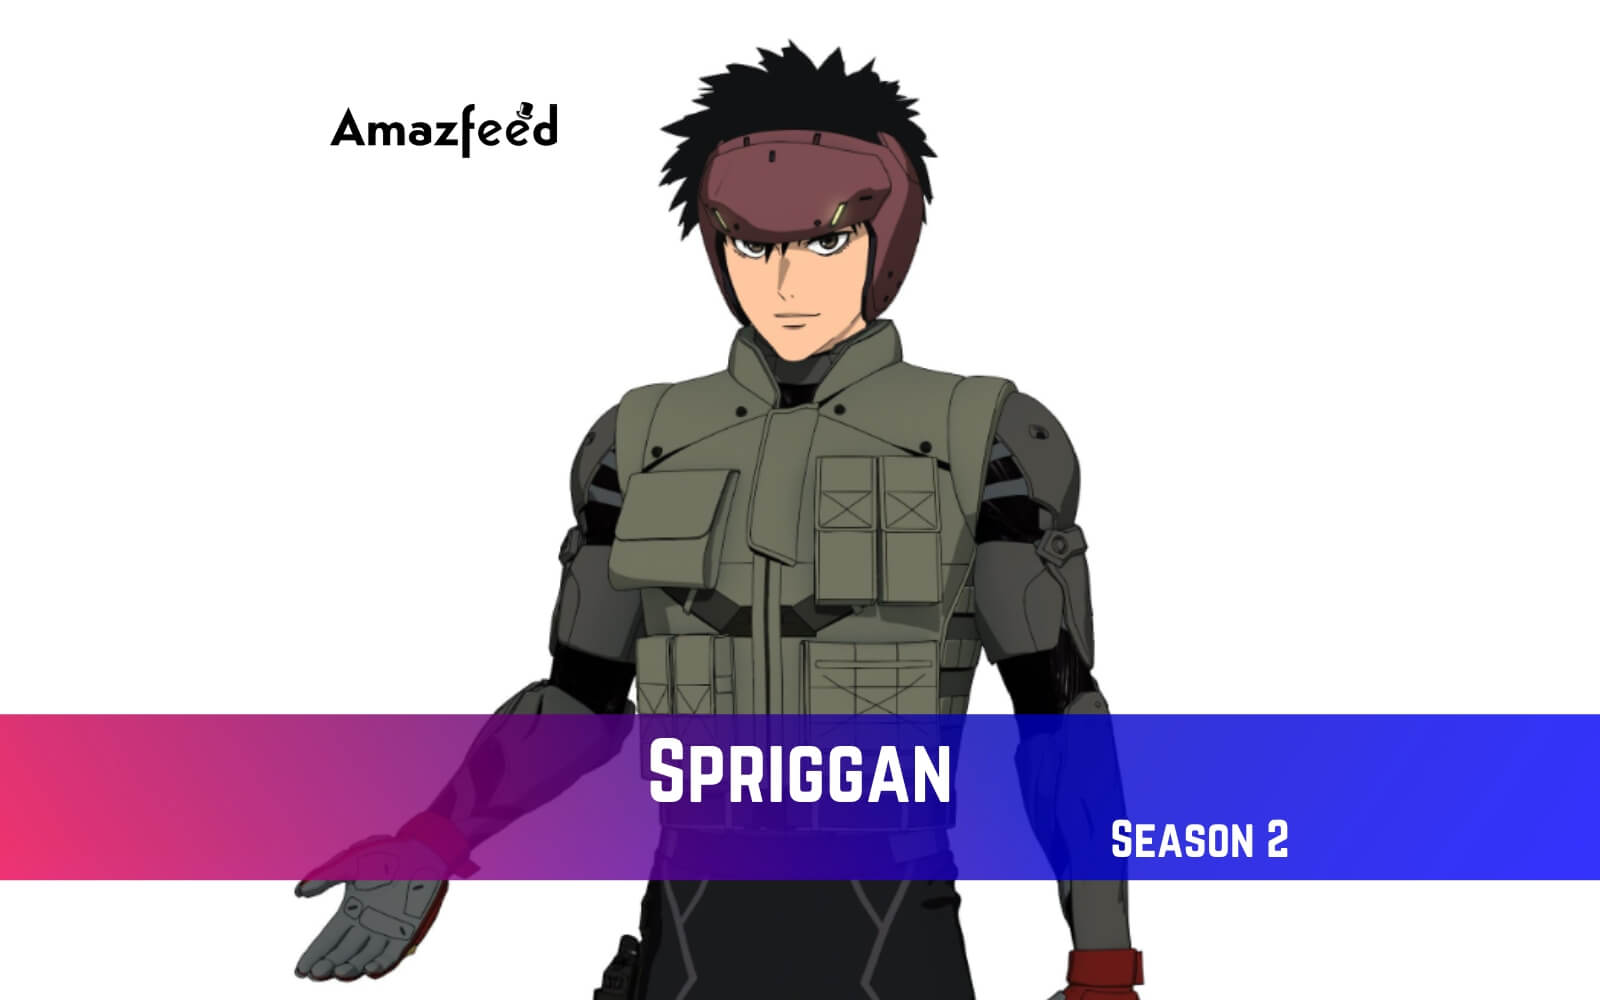 Spriggan Anime Series Adaptation is Coming to Netflix in June 2022   Whats on Netflix